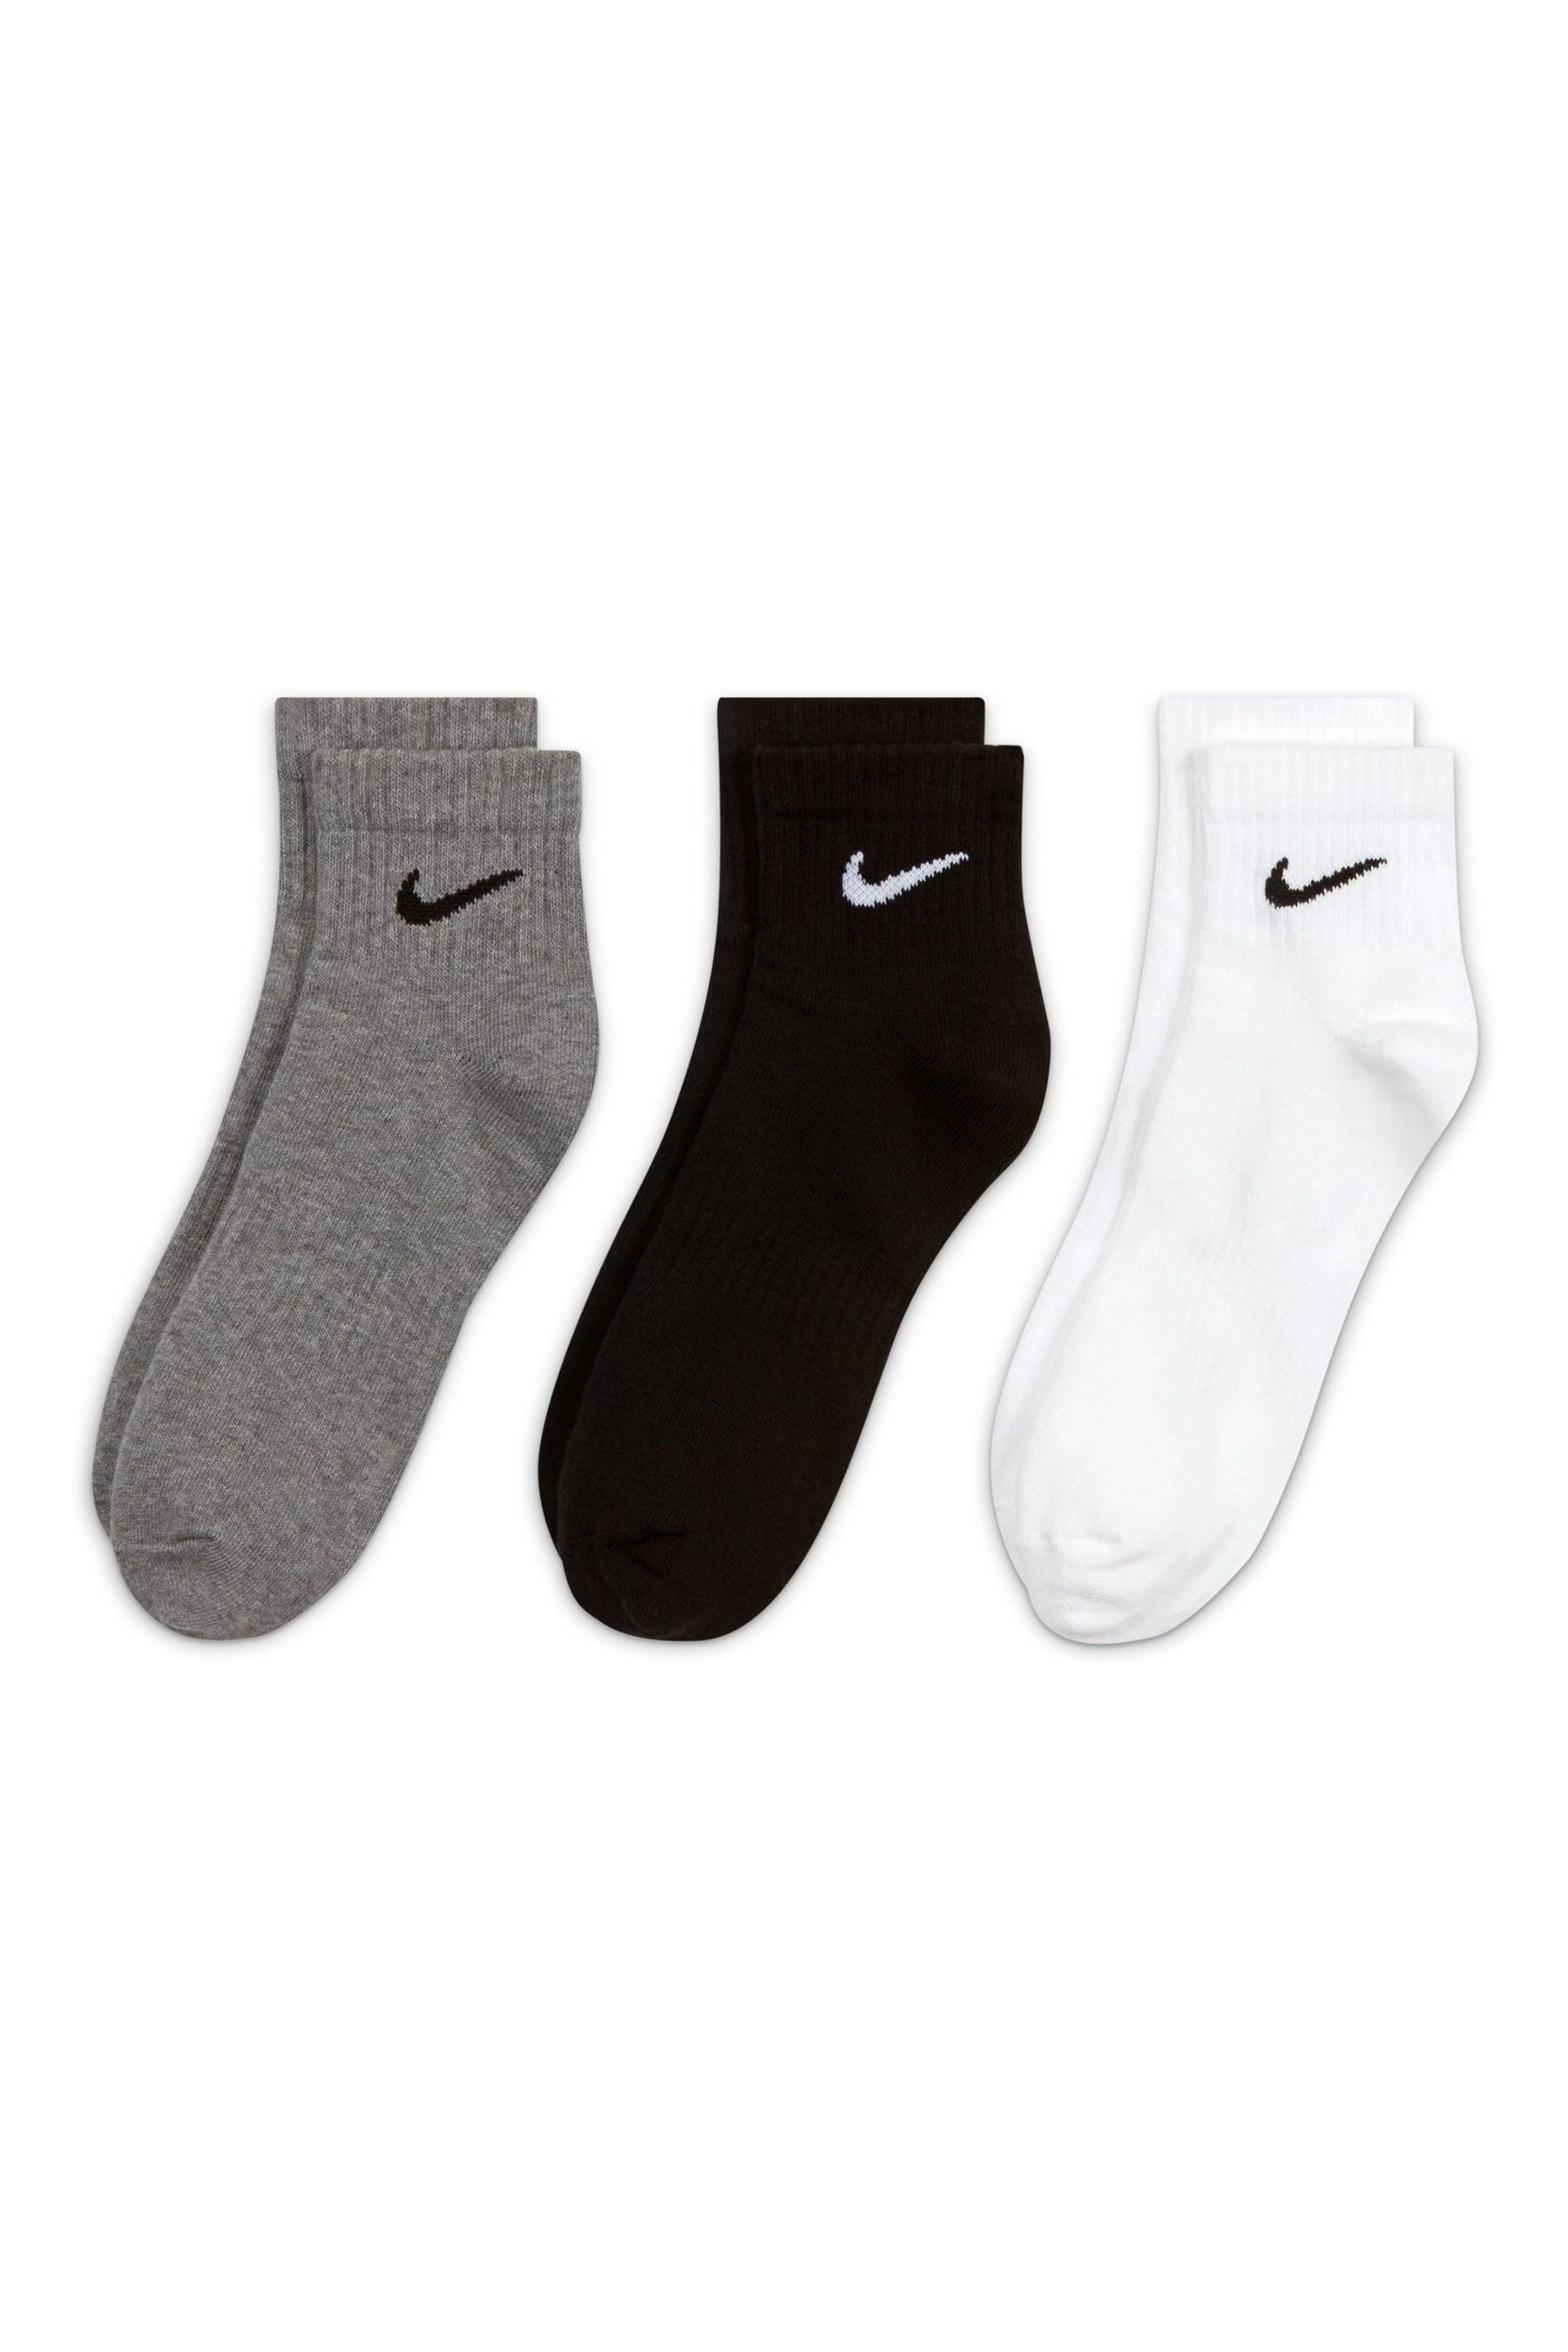 Buy Nike White/Black Lightweight Cushioned Ankle Socks 3 Pack from the ...